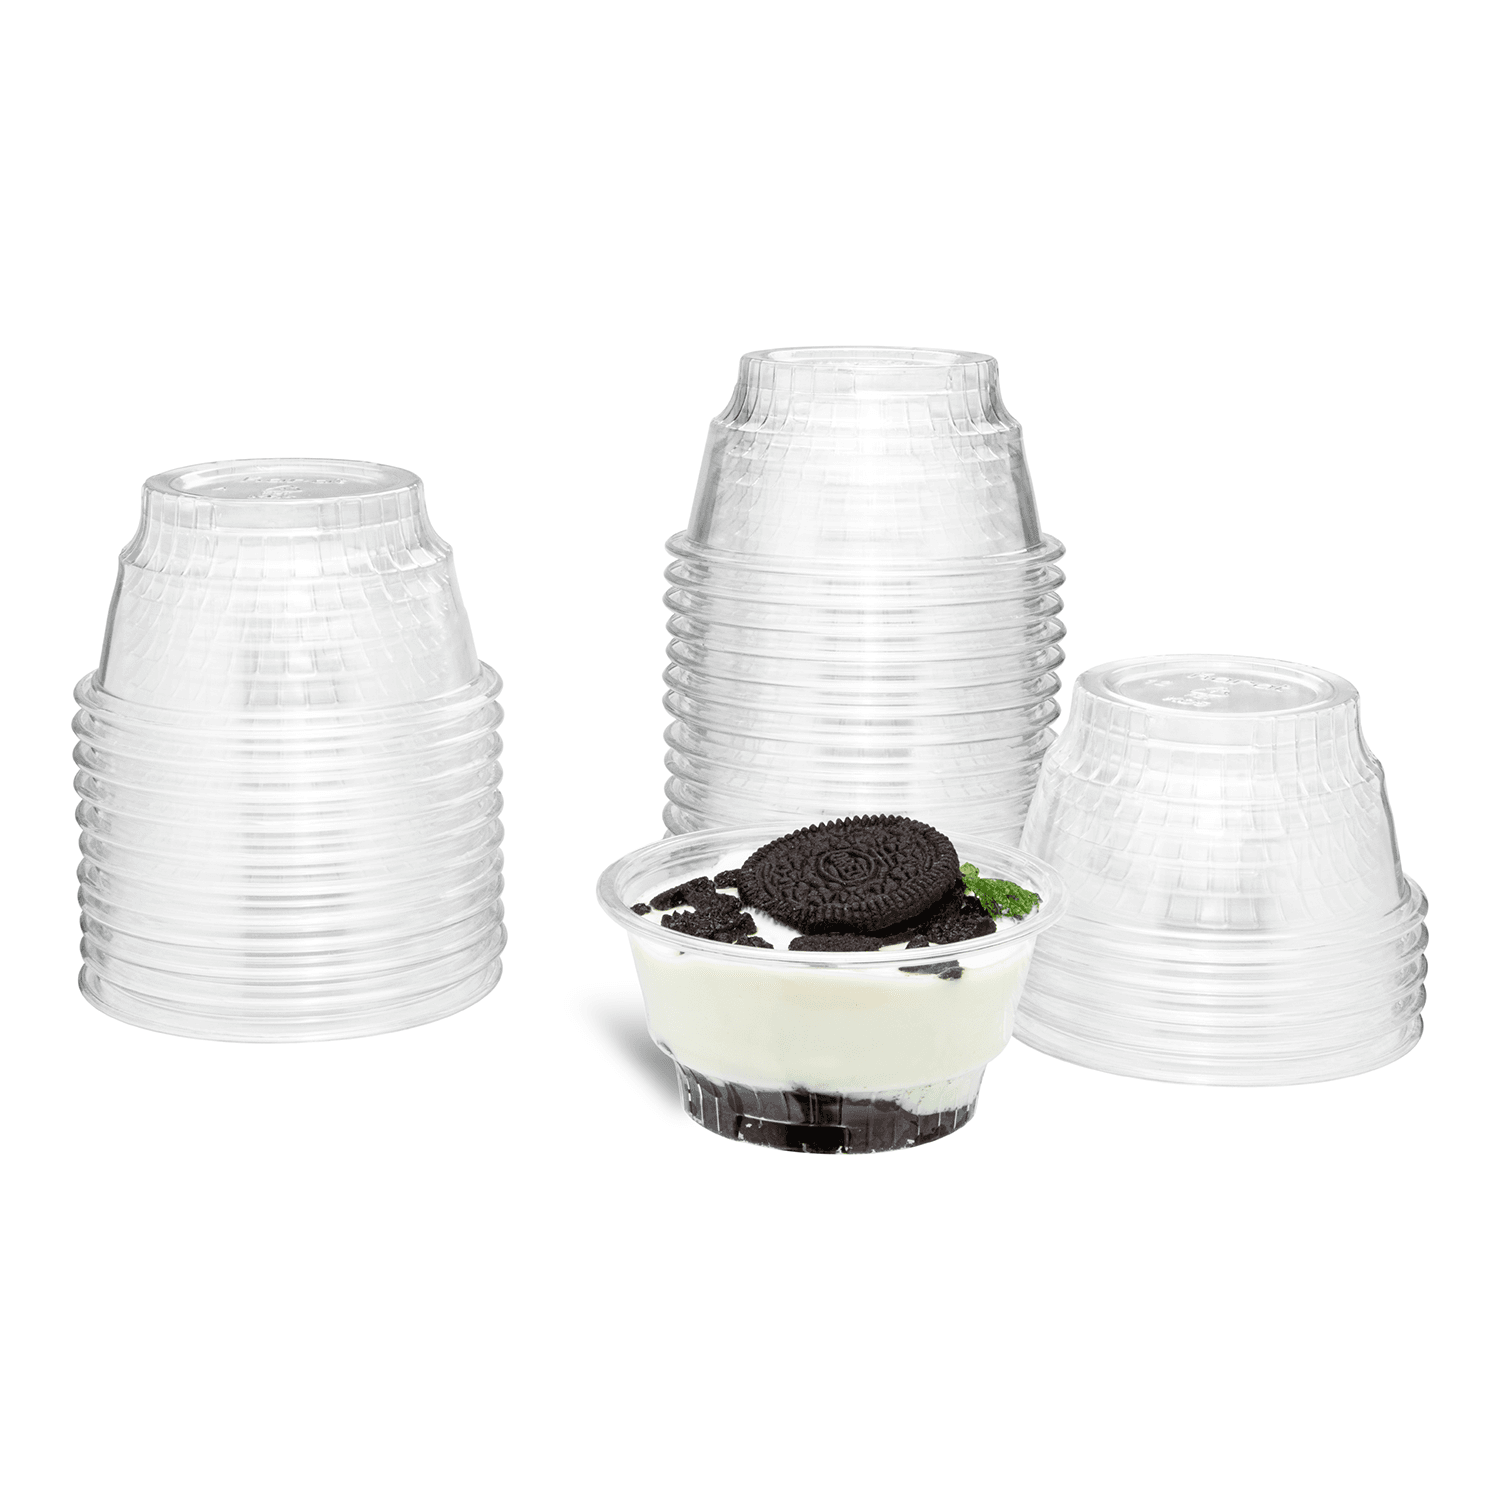 Karat 5oz PET Plastic Dessert Cups stacked with cookies and cream pudding